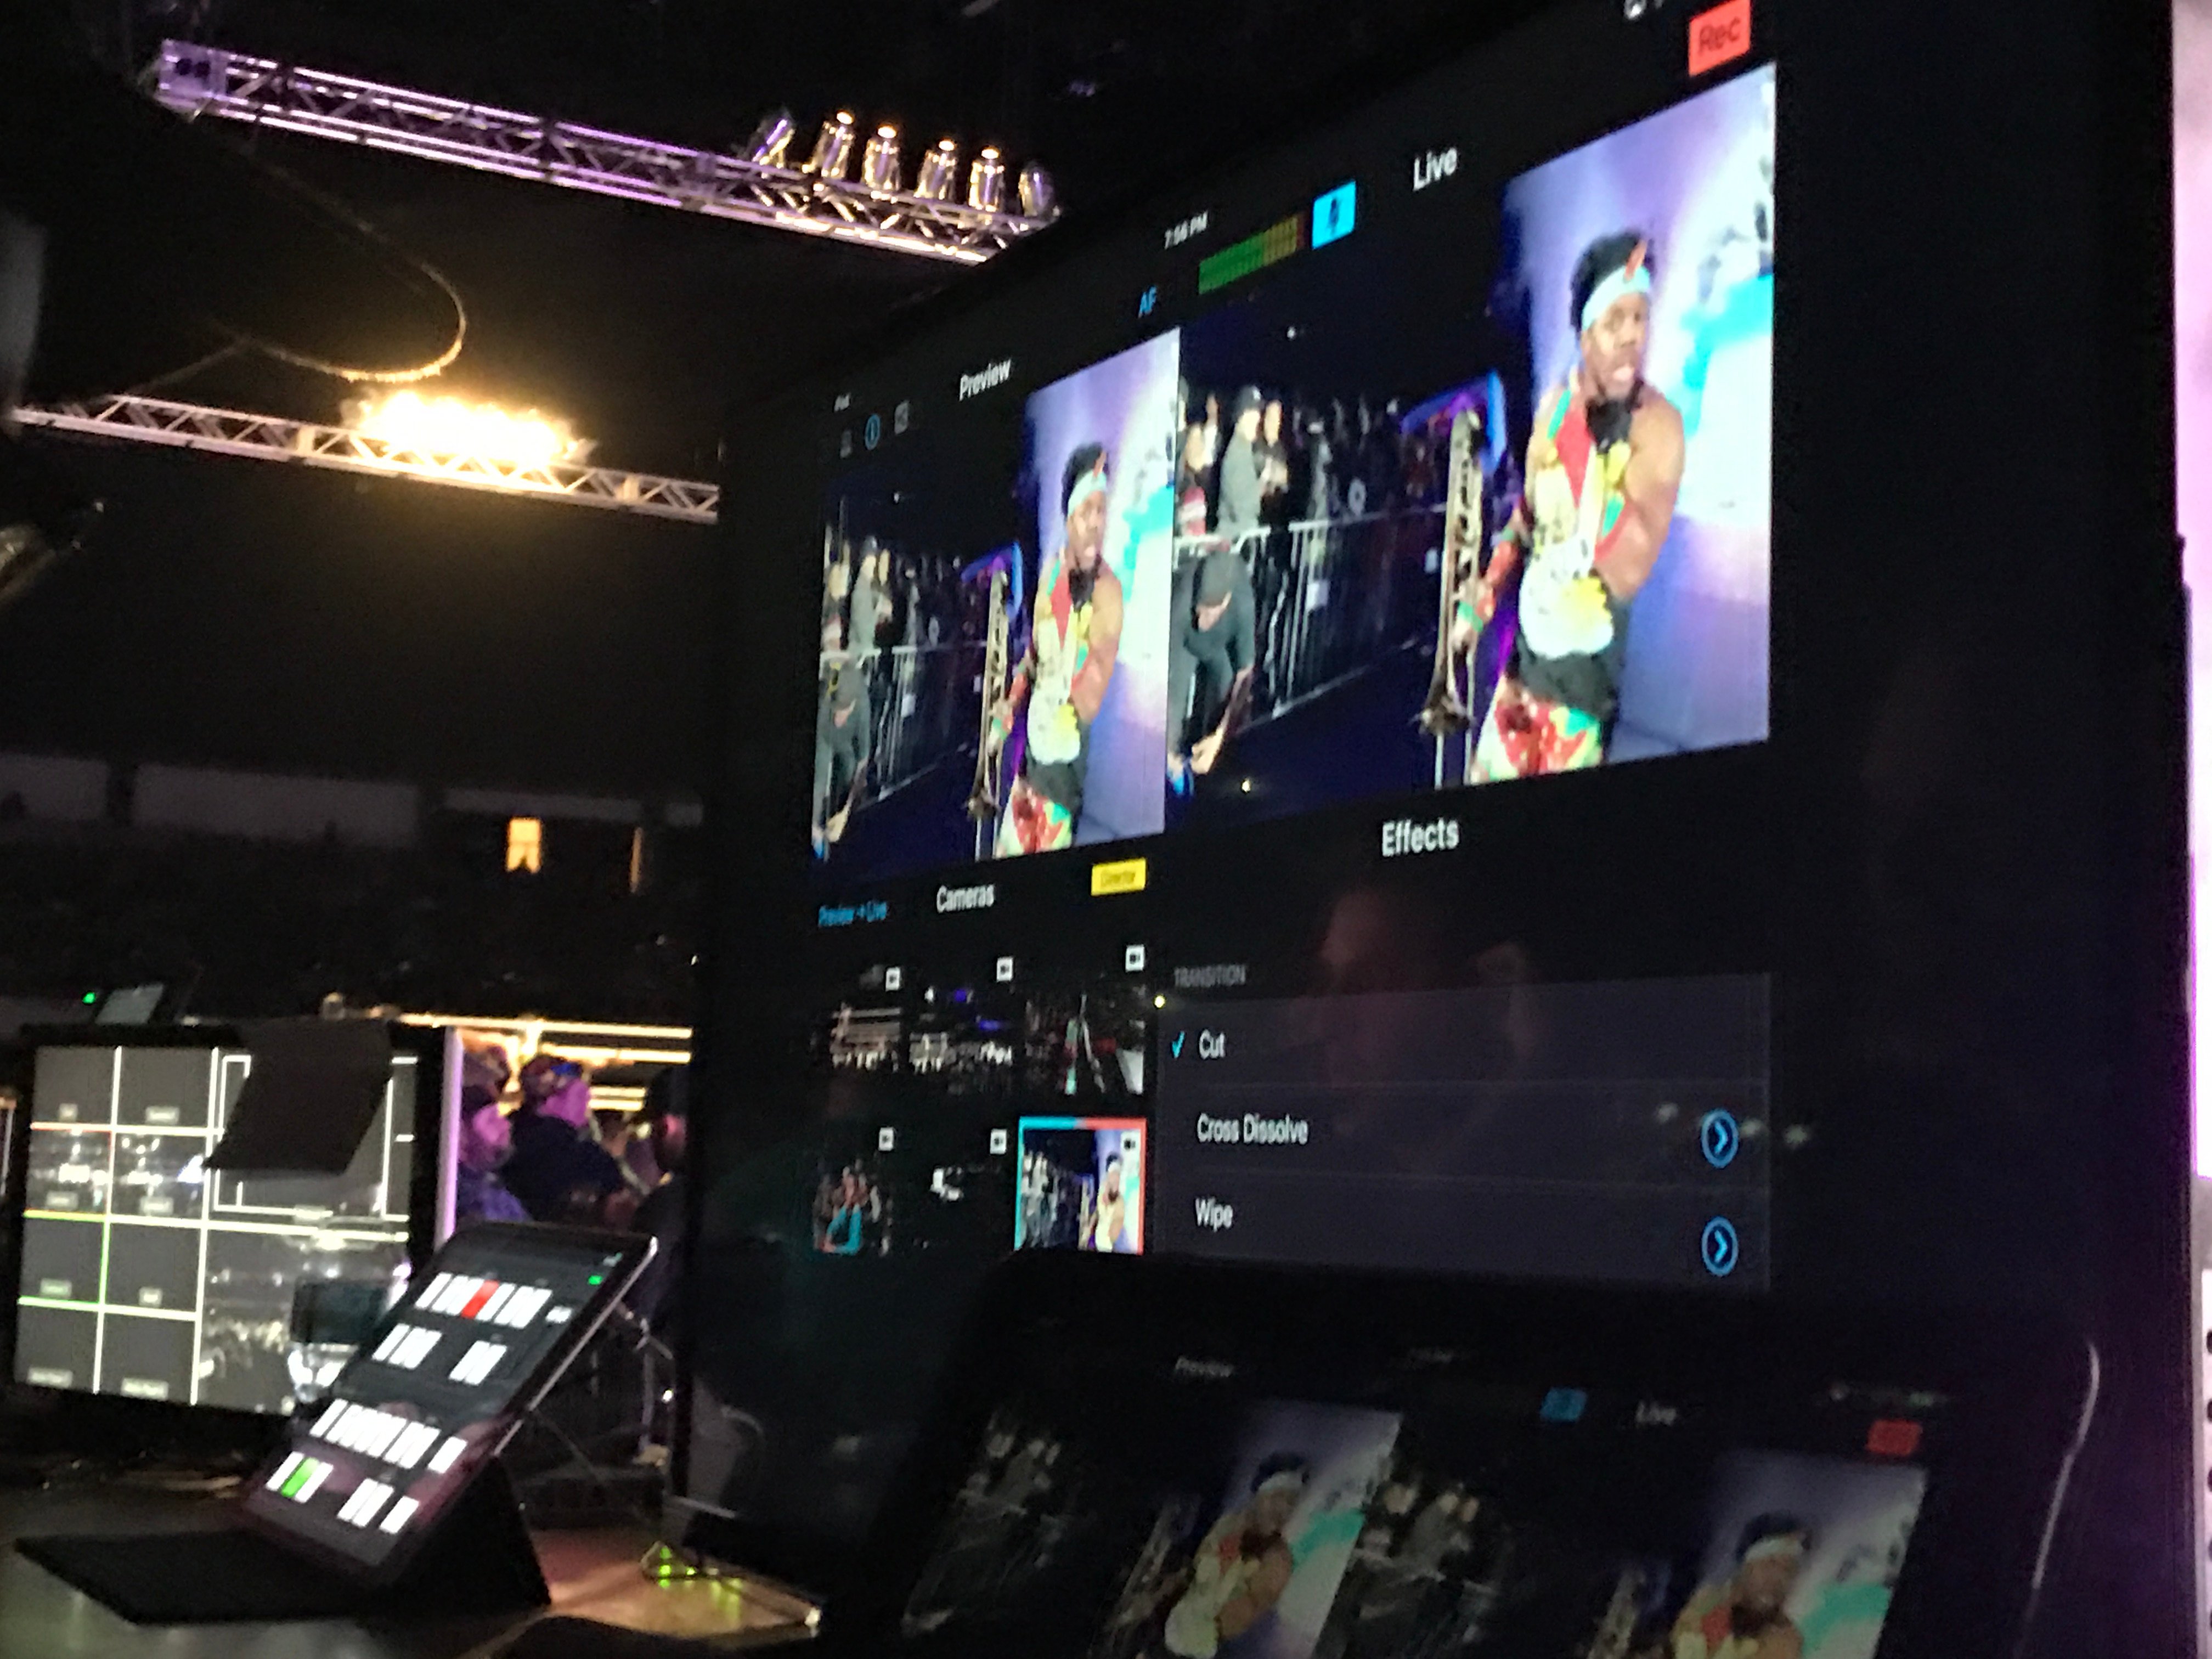 How WWE Uses Switcher to Lay the SmackDown (Nay, Livestream It!)